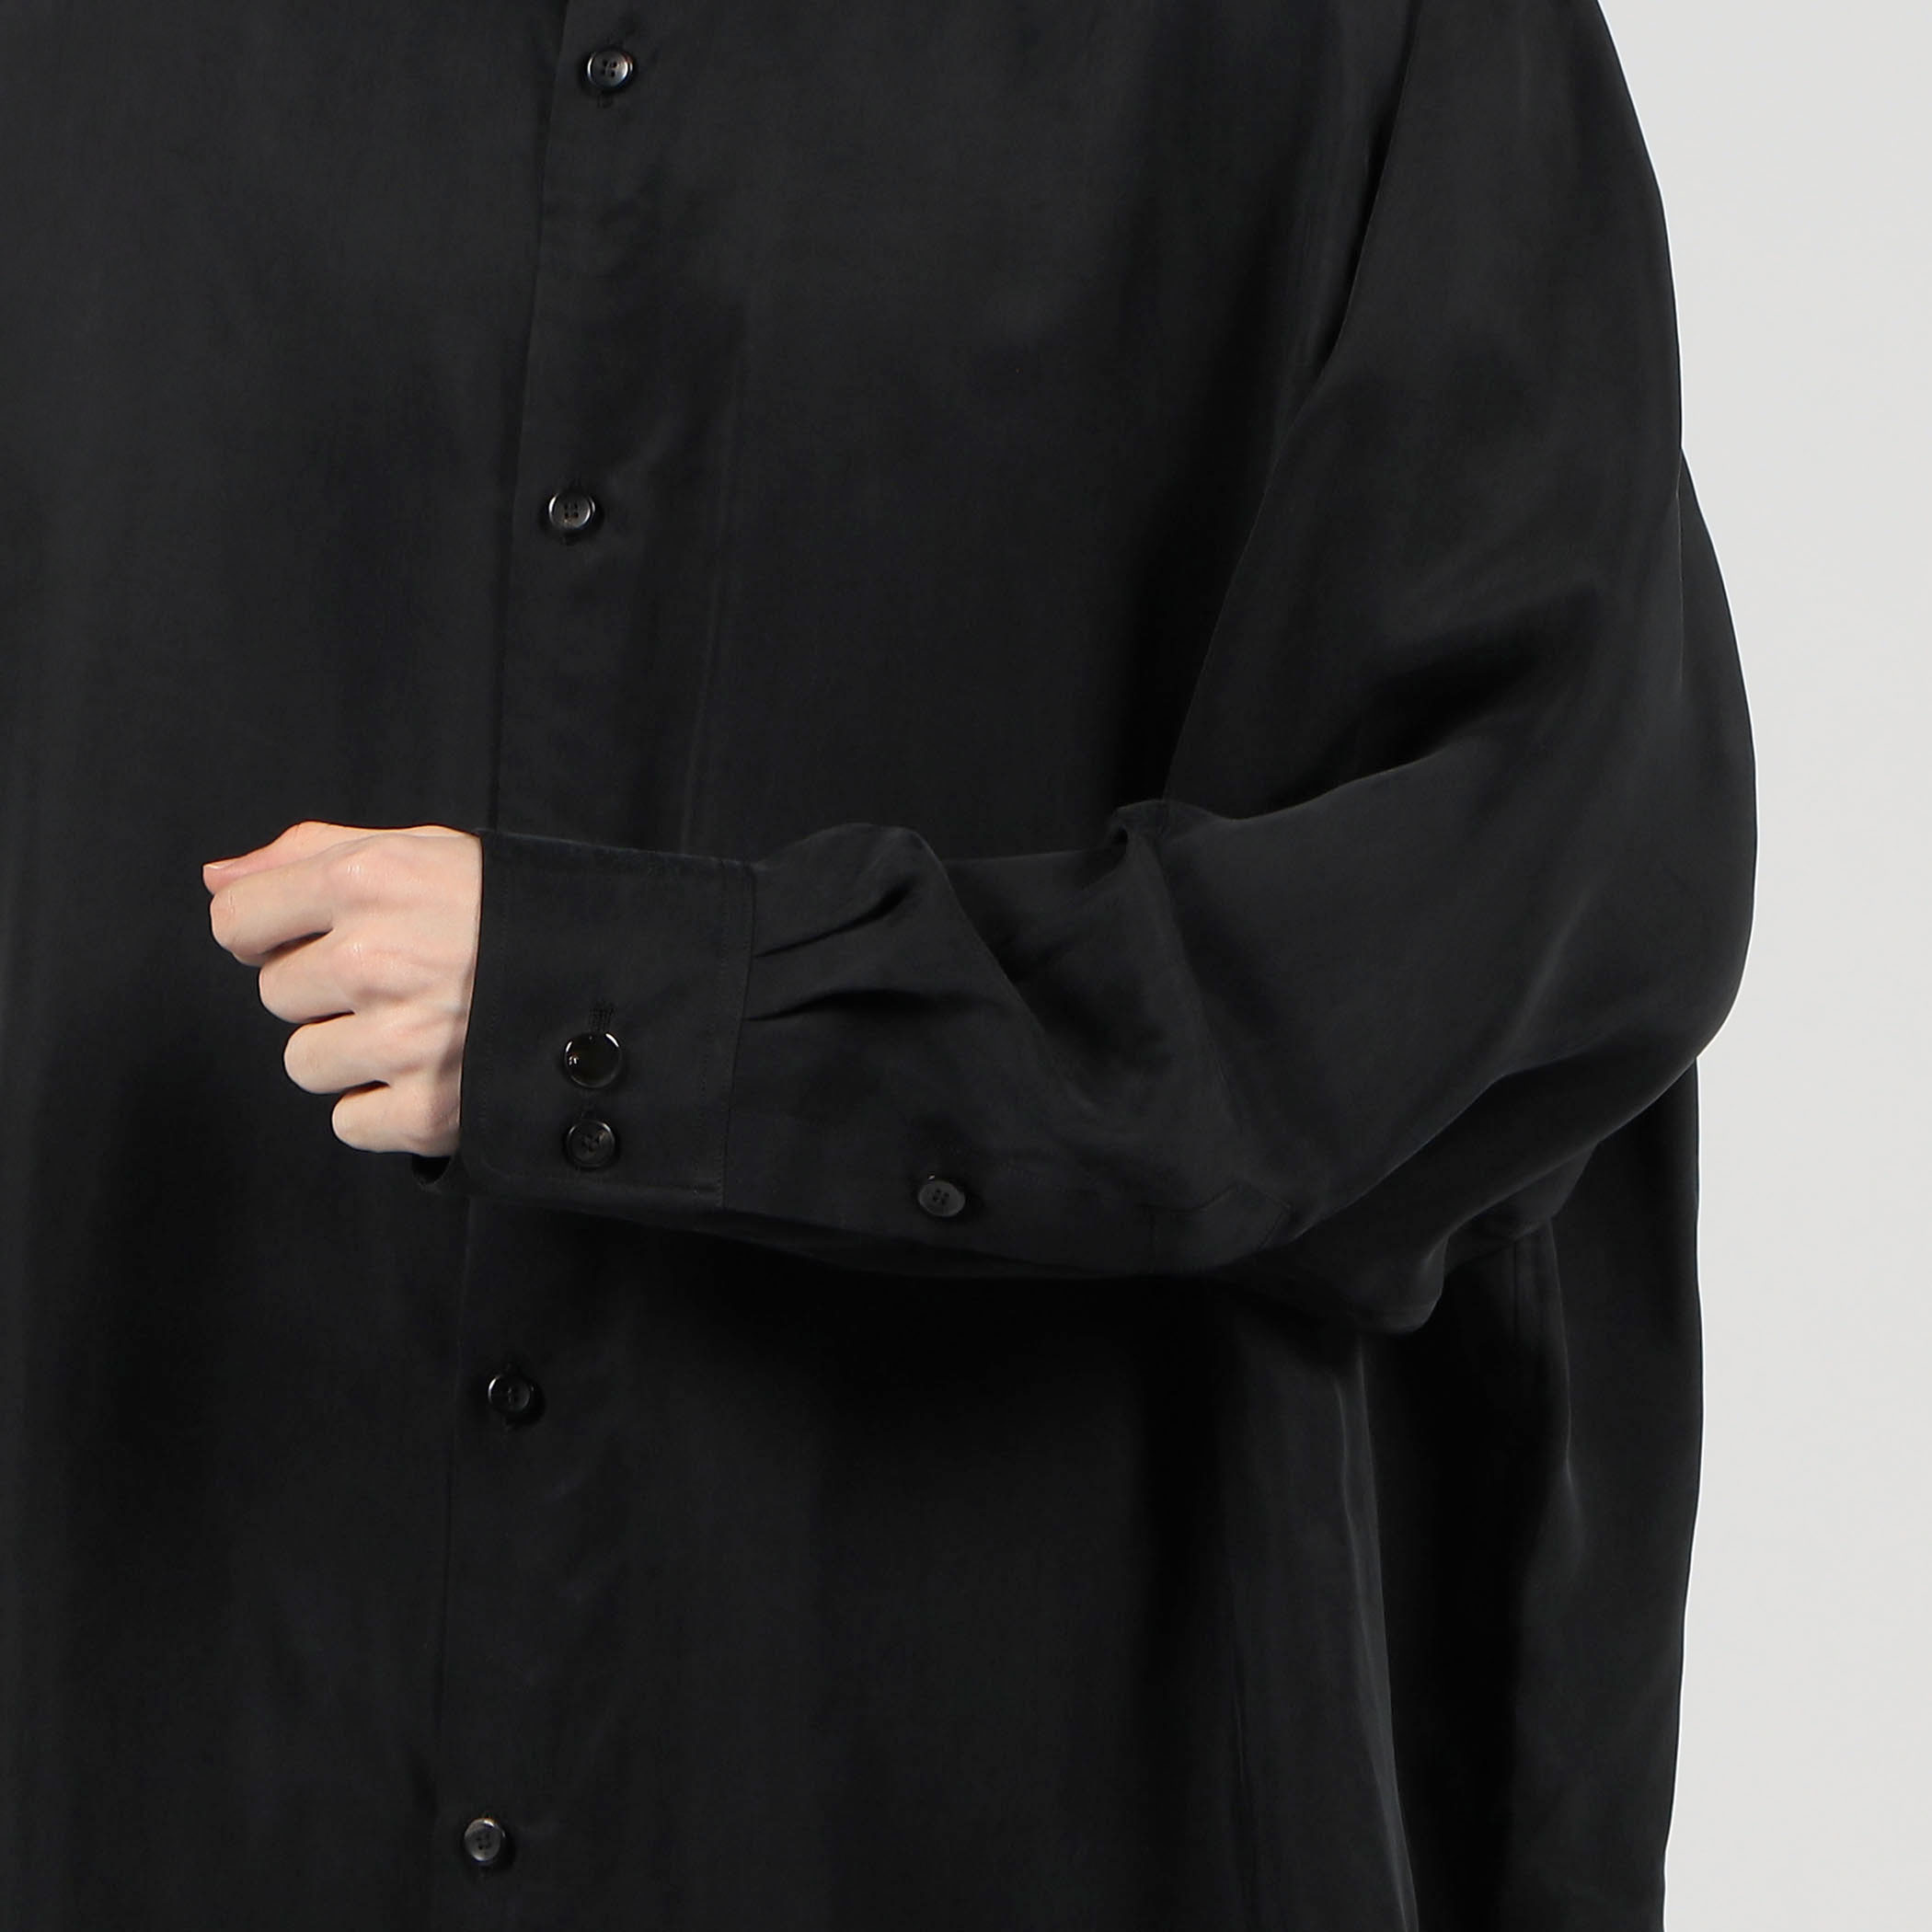 th products Oversized Shirt シャツ｜トゥモローランド 公式通販